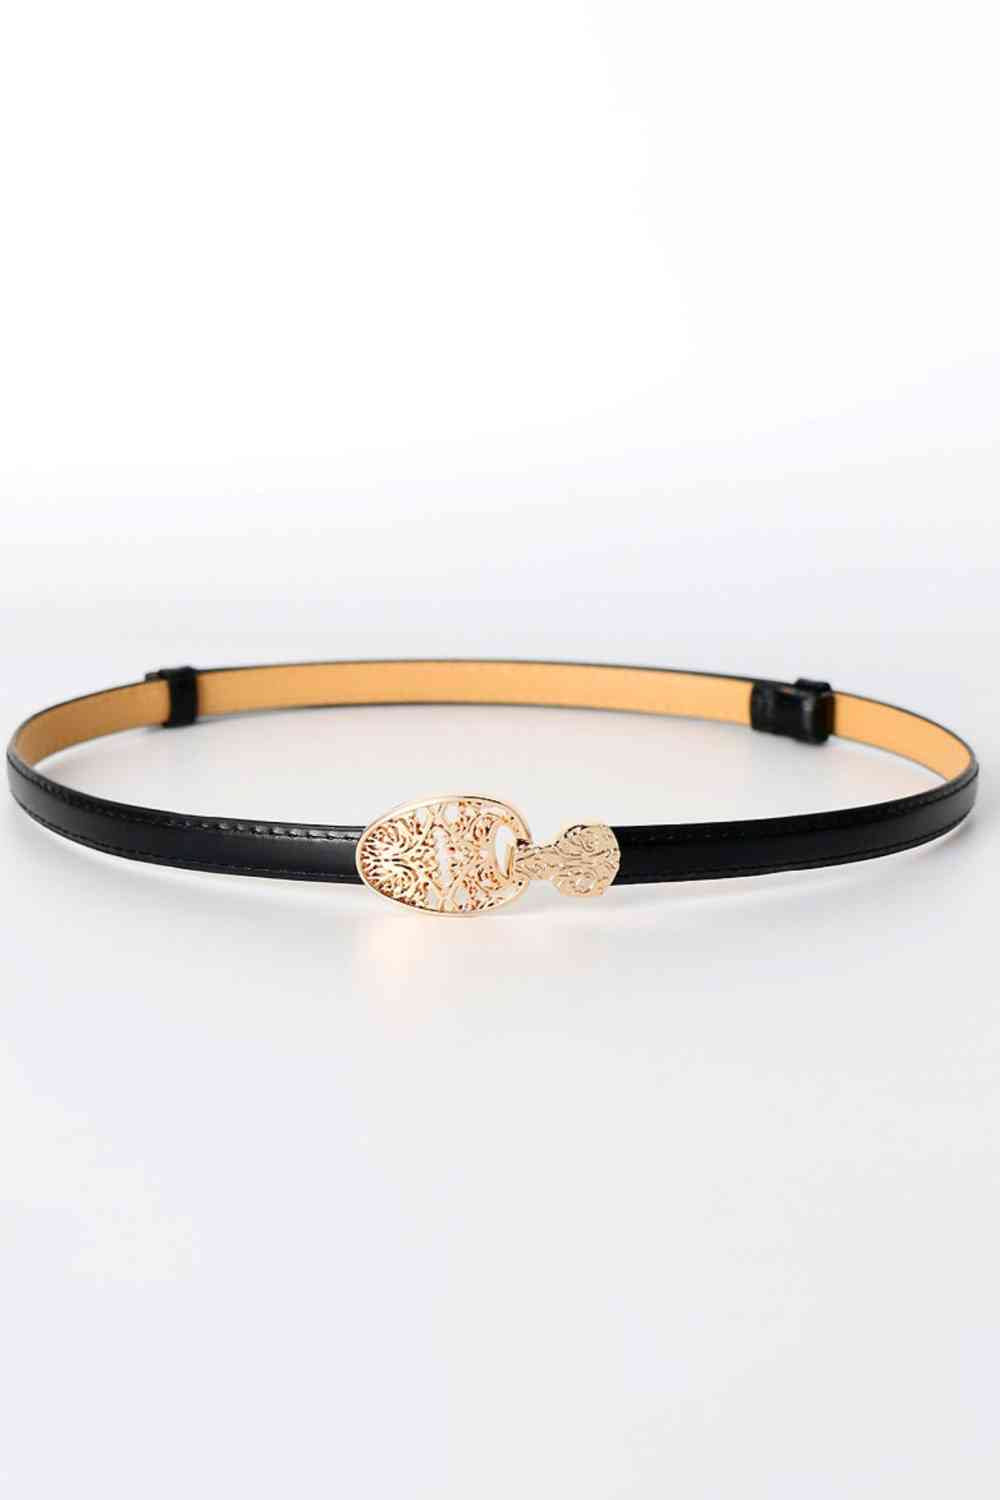 Skinny PU Leather Belt with Alloy Buckle Black One Size